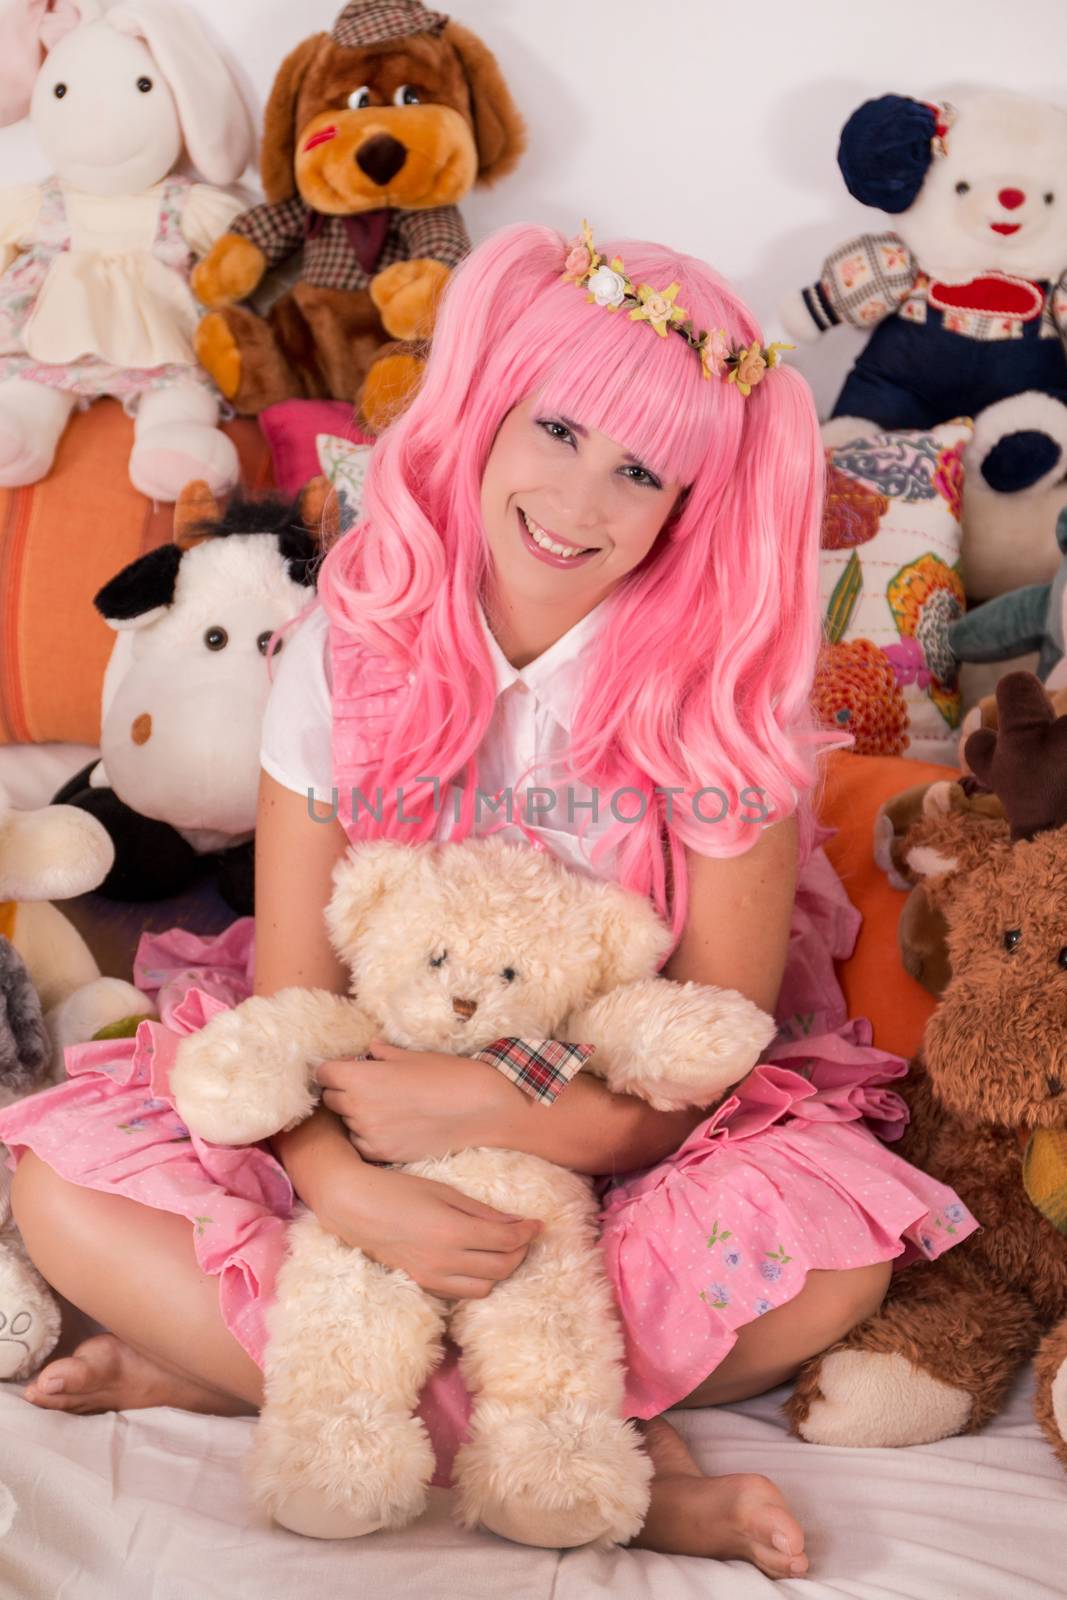 young girl in a bedroom in a pink cute dress